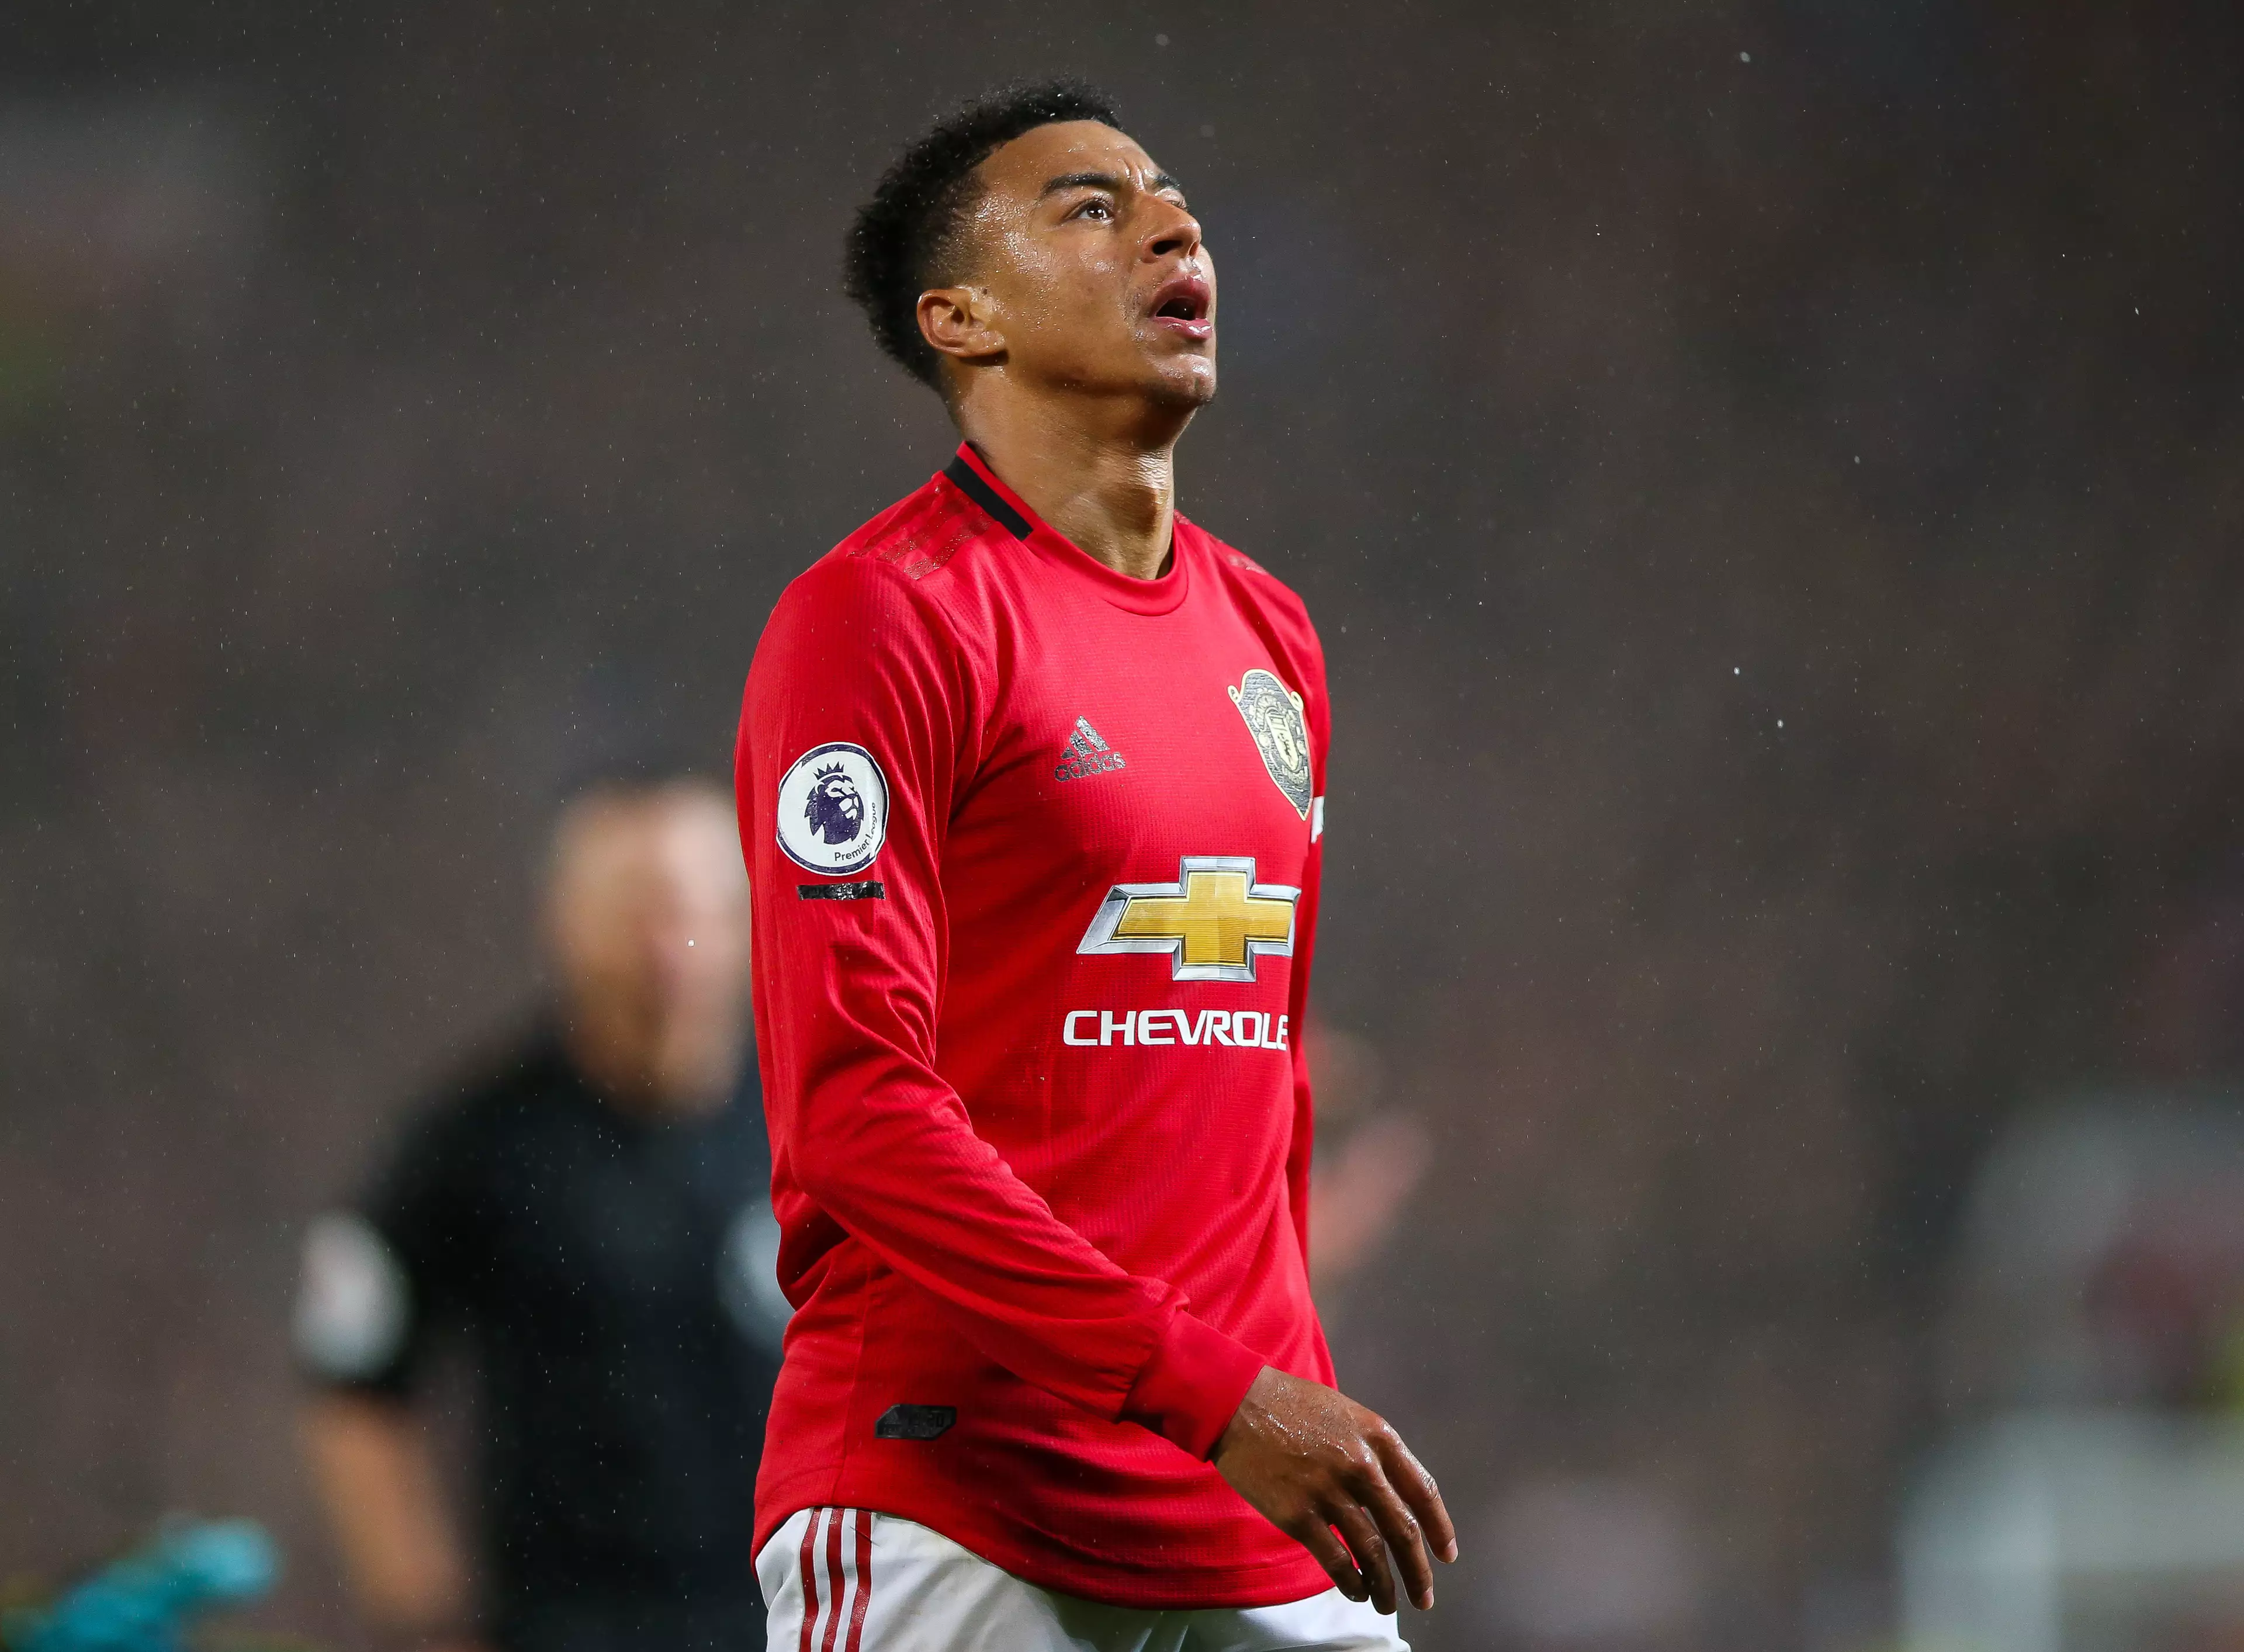 Chevrolet will be as disappointed with United's performance as Lingard. Image: PA Images